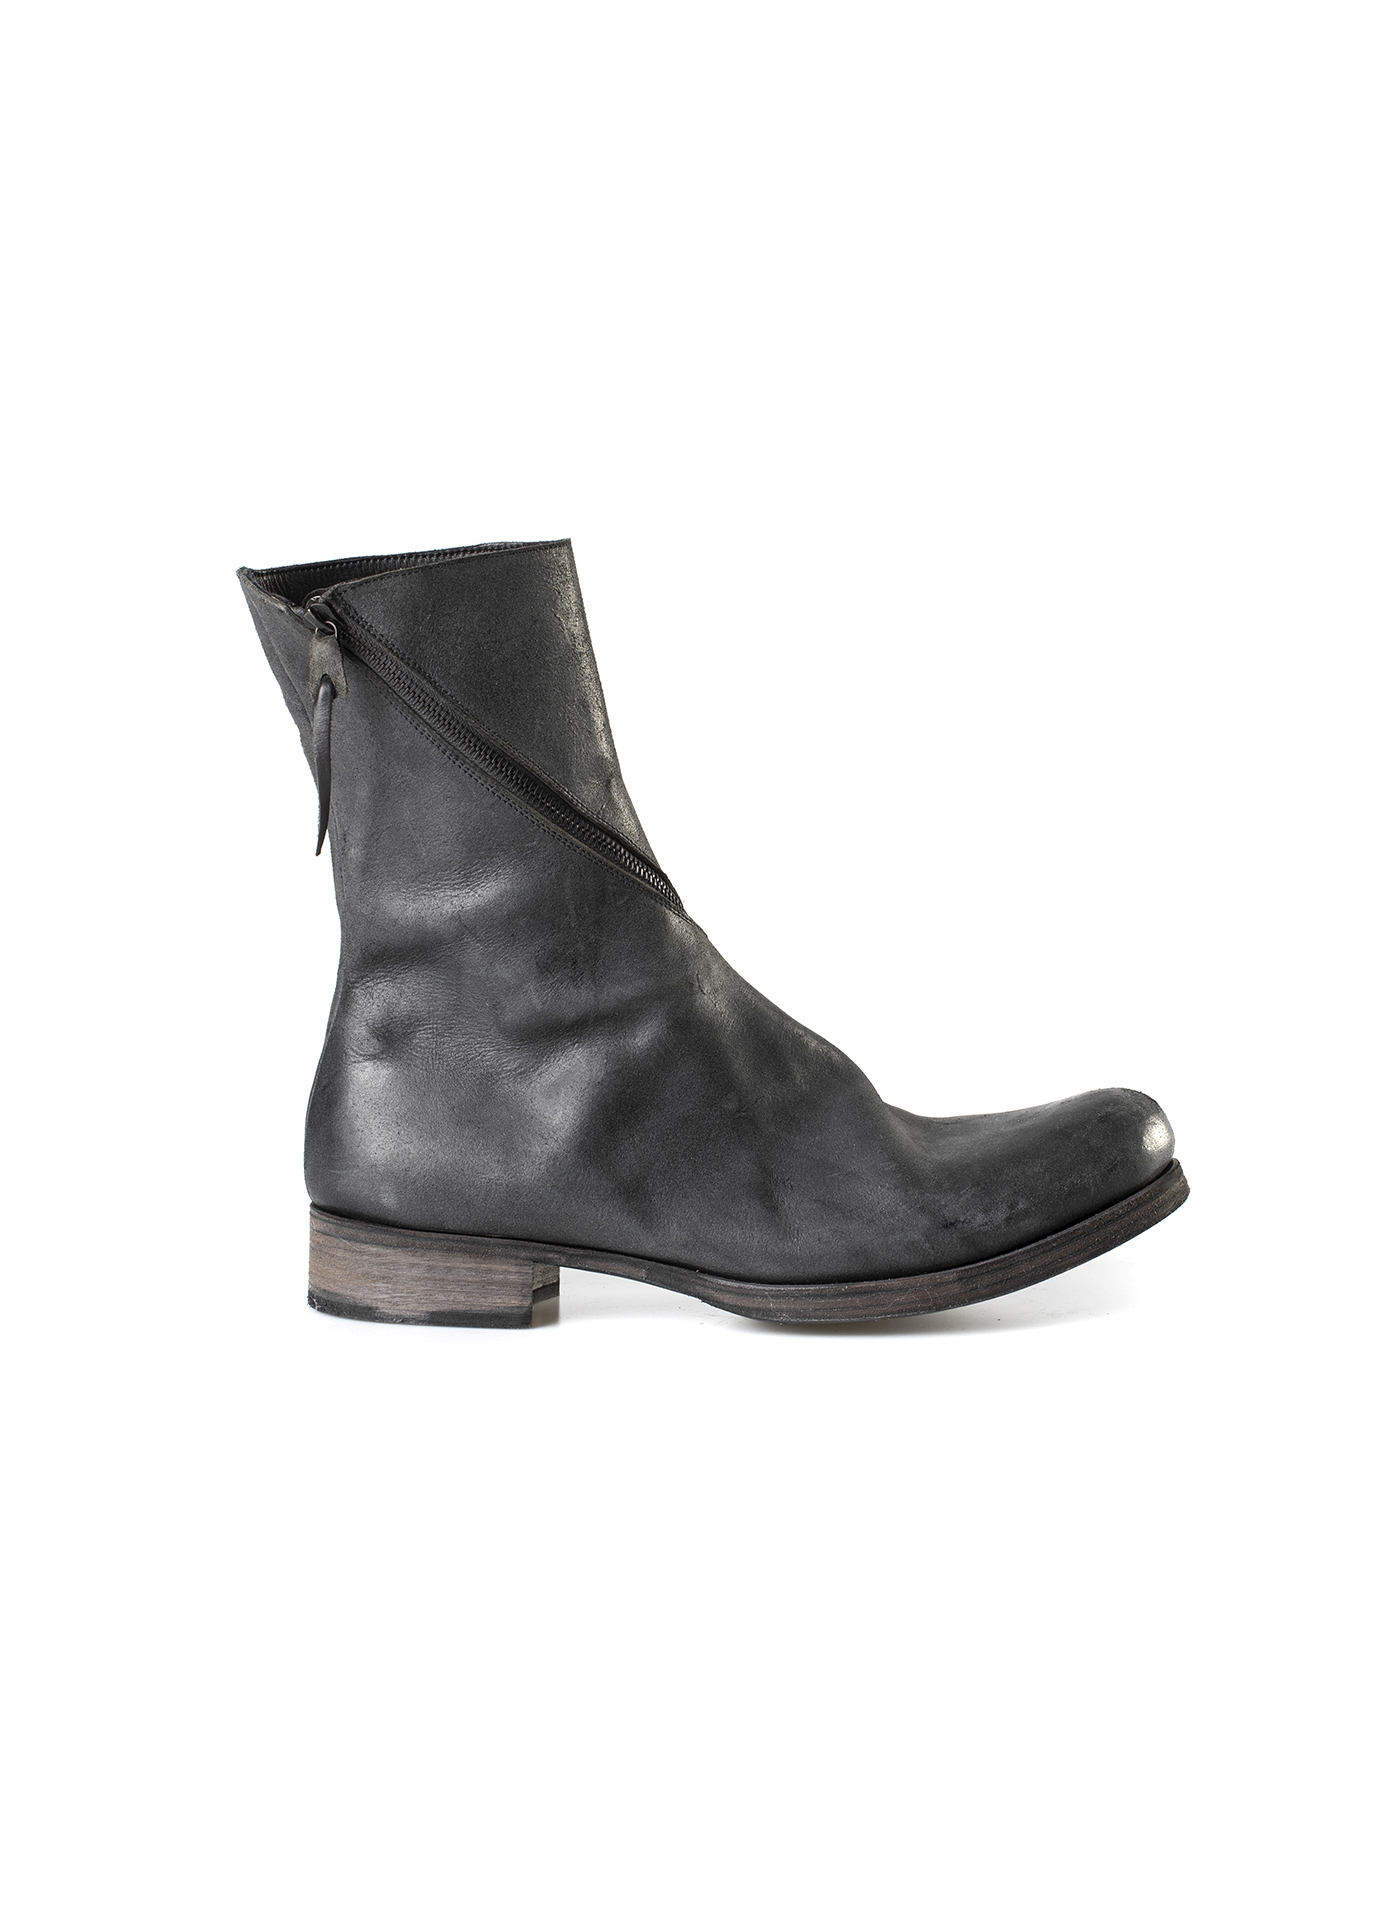 hide-m | m.a+ Maurizio Amadei Spiral Side Zip Boot S1G3Z, black leather